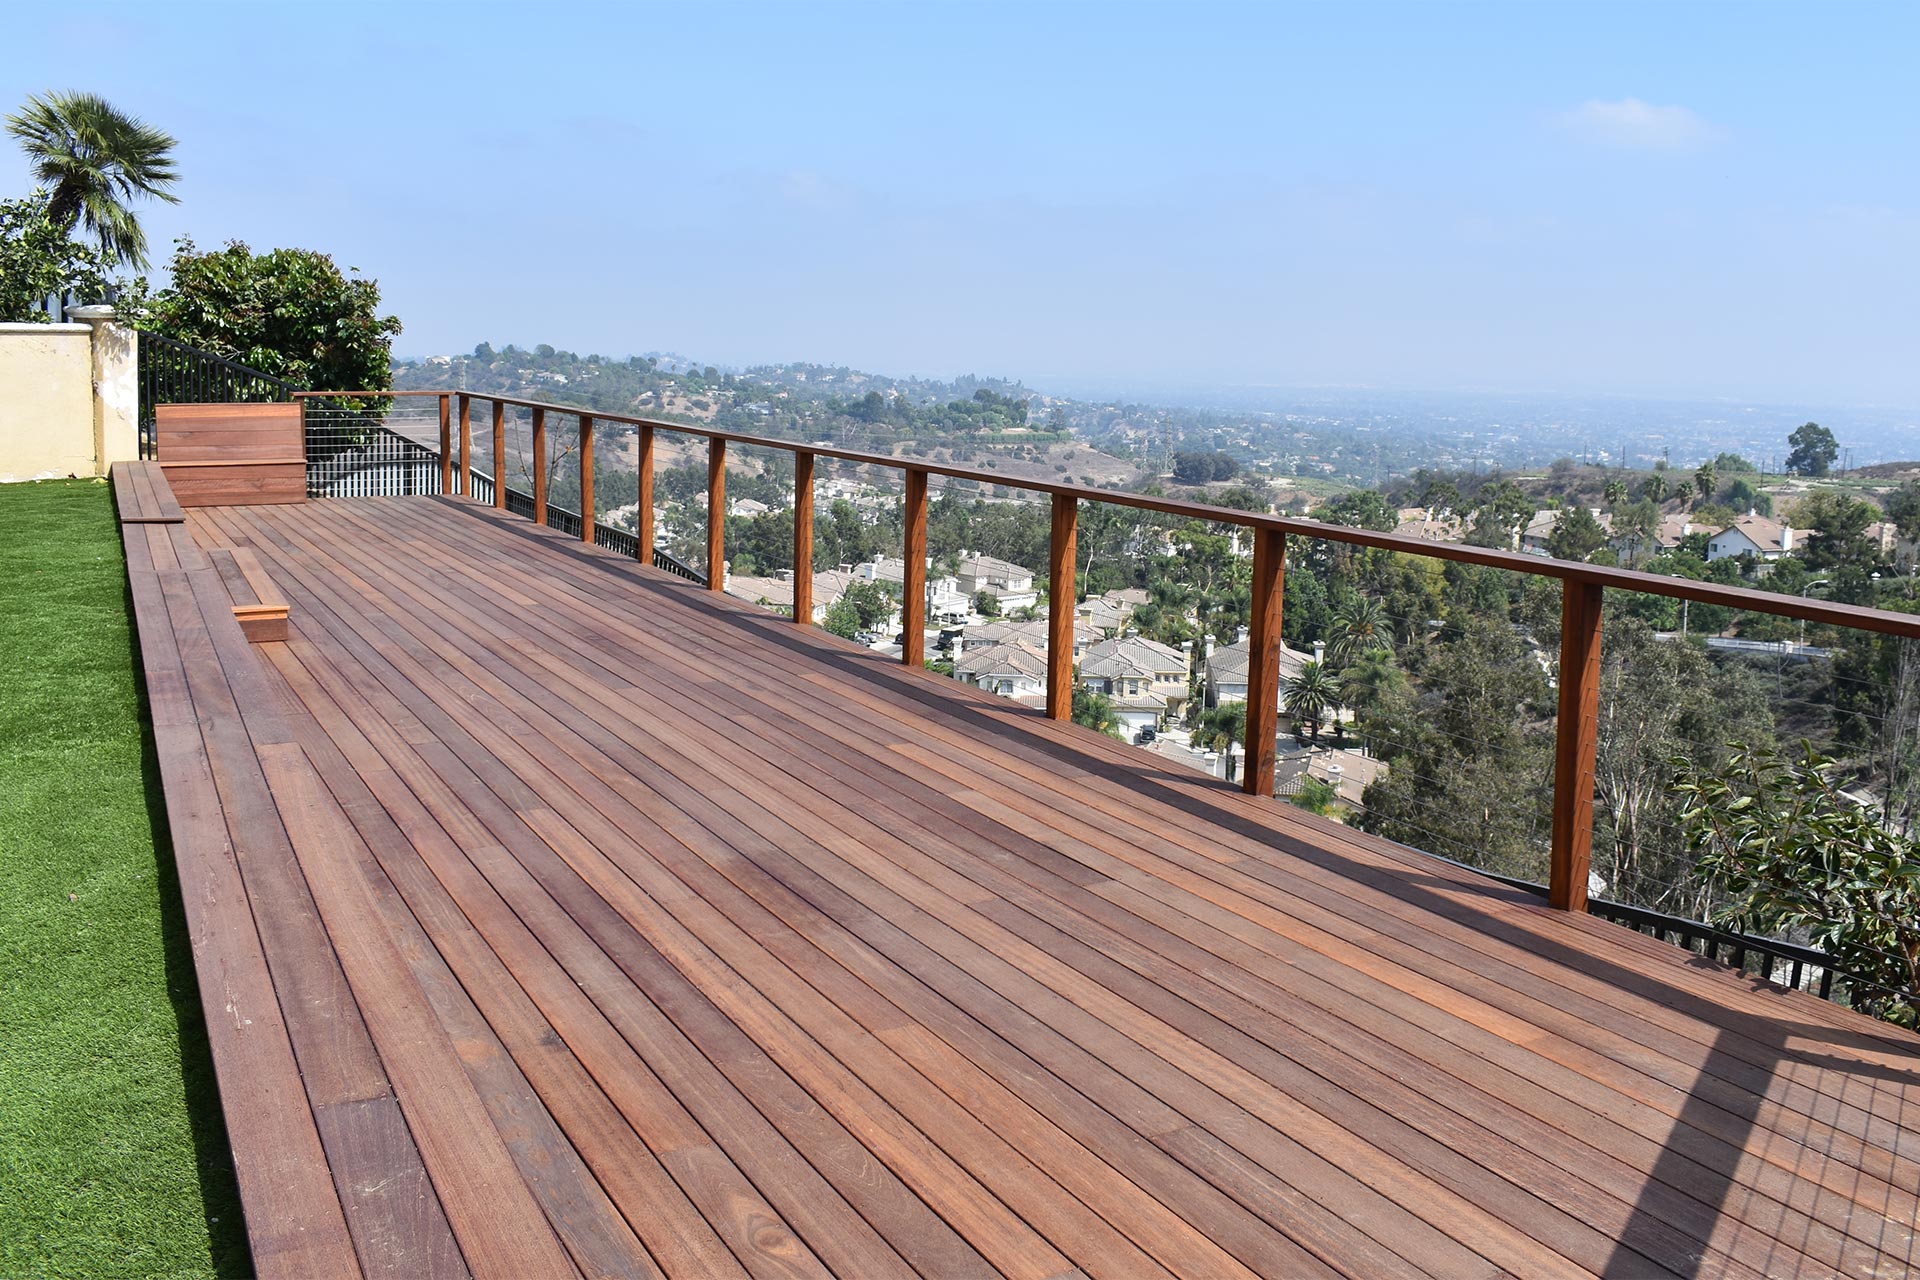 broad wooden backyard deck overlooking a sunny city